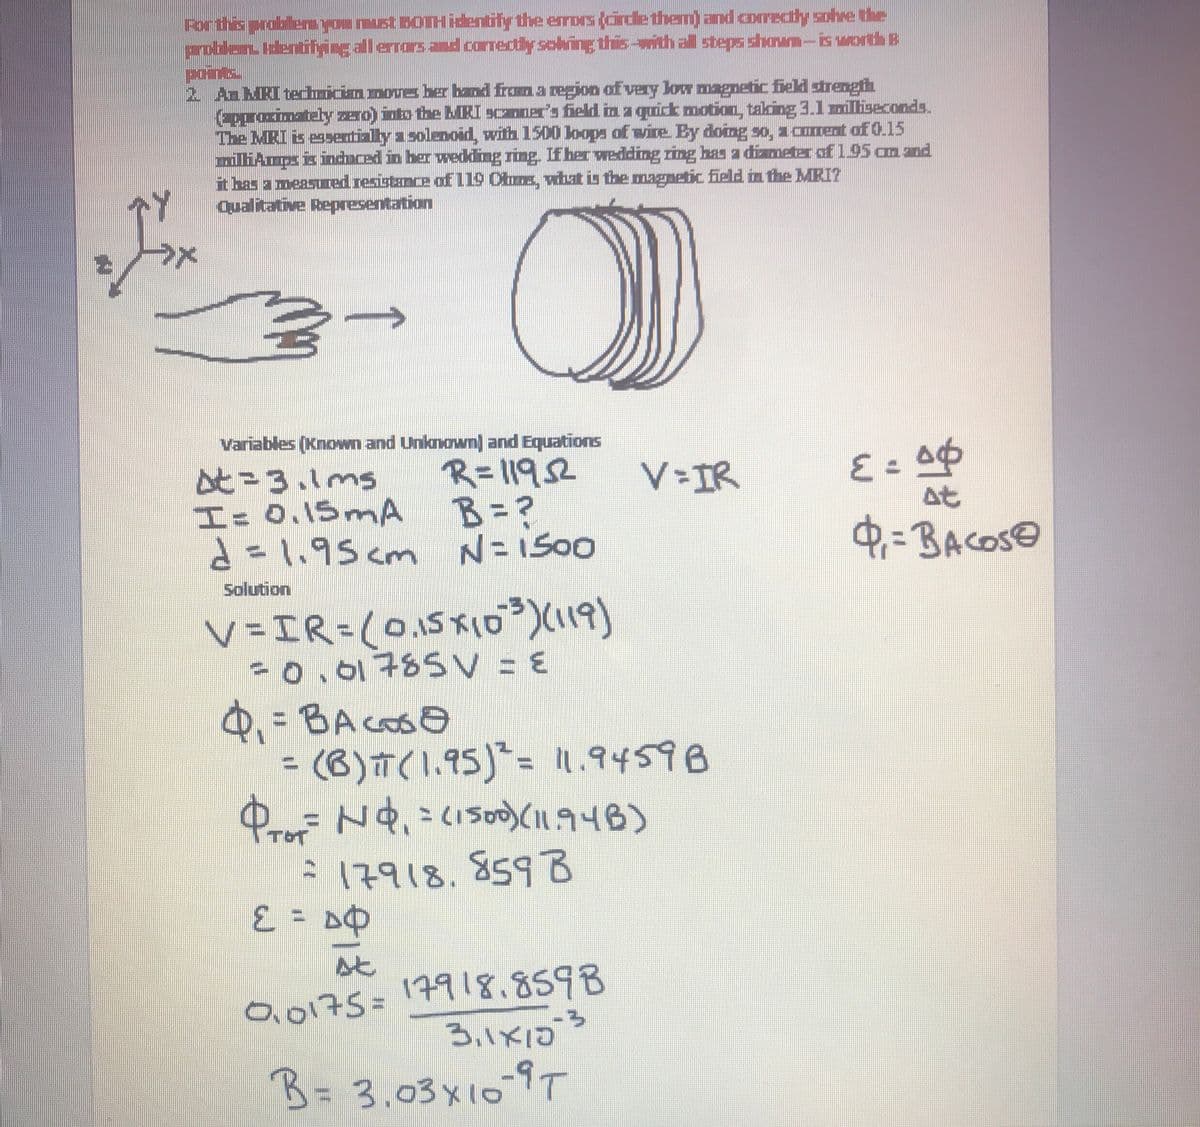 Forthis problenyou must DOTH identify the errors (cirdle them) and corredtly sohre the
problen Identifying all errars and correctly solving this-with all steps shoum-is worth B
poins.
2 AnMRI techicinmove ber band framaegion of very low magnetic field strength
epproximately zero) into the bRI Scaner's field in a quick motion, taking 3.1l miliseconds.
The MRI is essentially a soleoid, with 1500 loops of wire. By doing so, a corent of 0.15
liAmps is induced in her wedding ring. If her wedding ring has a dizmeter of195 am and
it bas a measured resistance of 119 Ctms, wat is the magnetic field in the MRI?
qualitative Representation
Variables (Known and Unknown] and Equations
と-3.1ms
I= 0.15 mA
と-1,95cm
R=11952
B=?
V IR
at
d=l,95 cm N=1500
0=BACOSO
Solution
V =IR=(0,15x1o)(119)
co,01785V = E
Q =BAcoso
(B)T(1.95)= 1.94598
ProF
A17918.859B
%3D
0,0175=17918.859B
B.1X1D
B= 3.03x10-9T
↑
